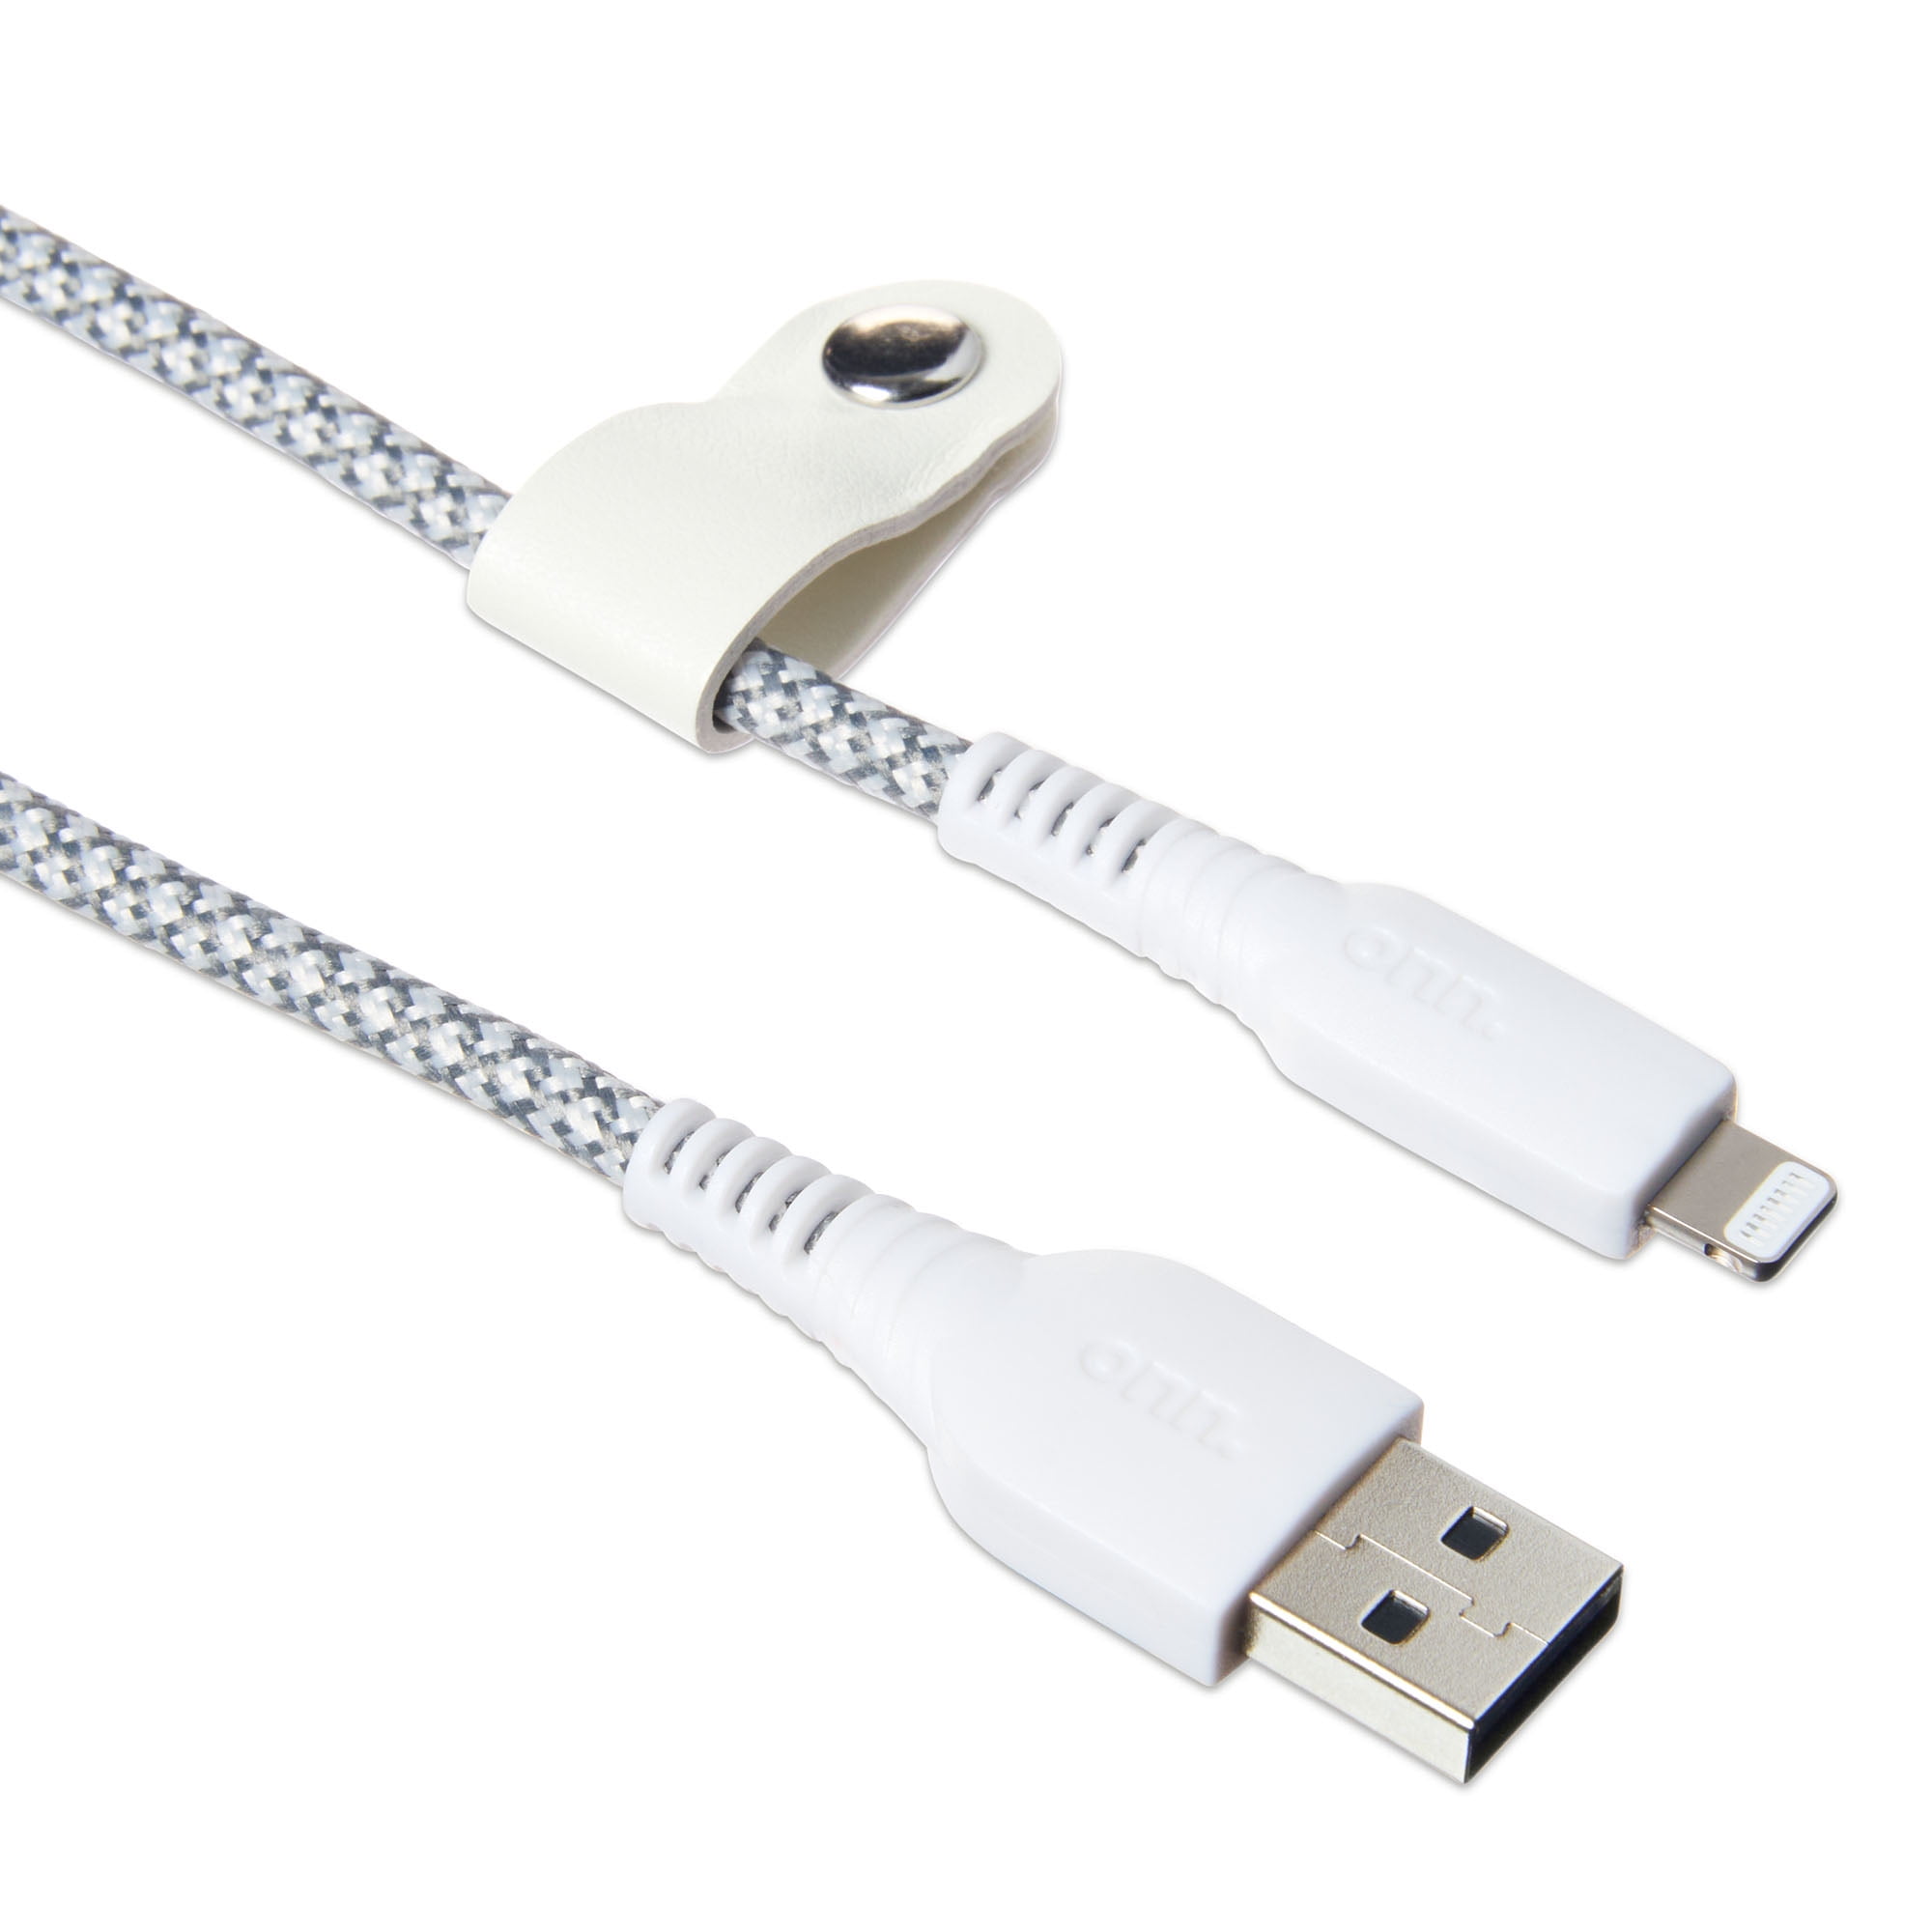 onn. Lightning Cable with Cable Management, White & Gray, 6'